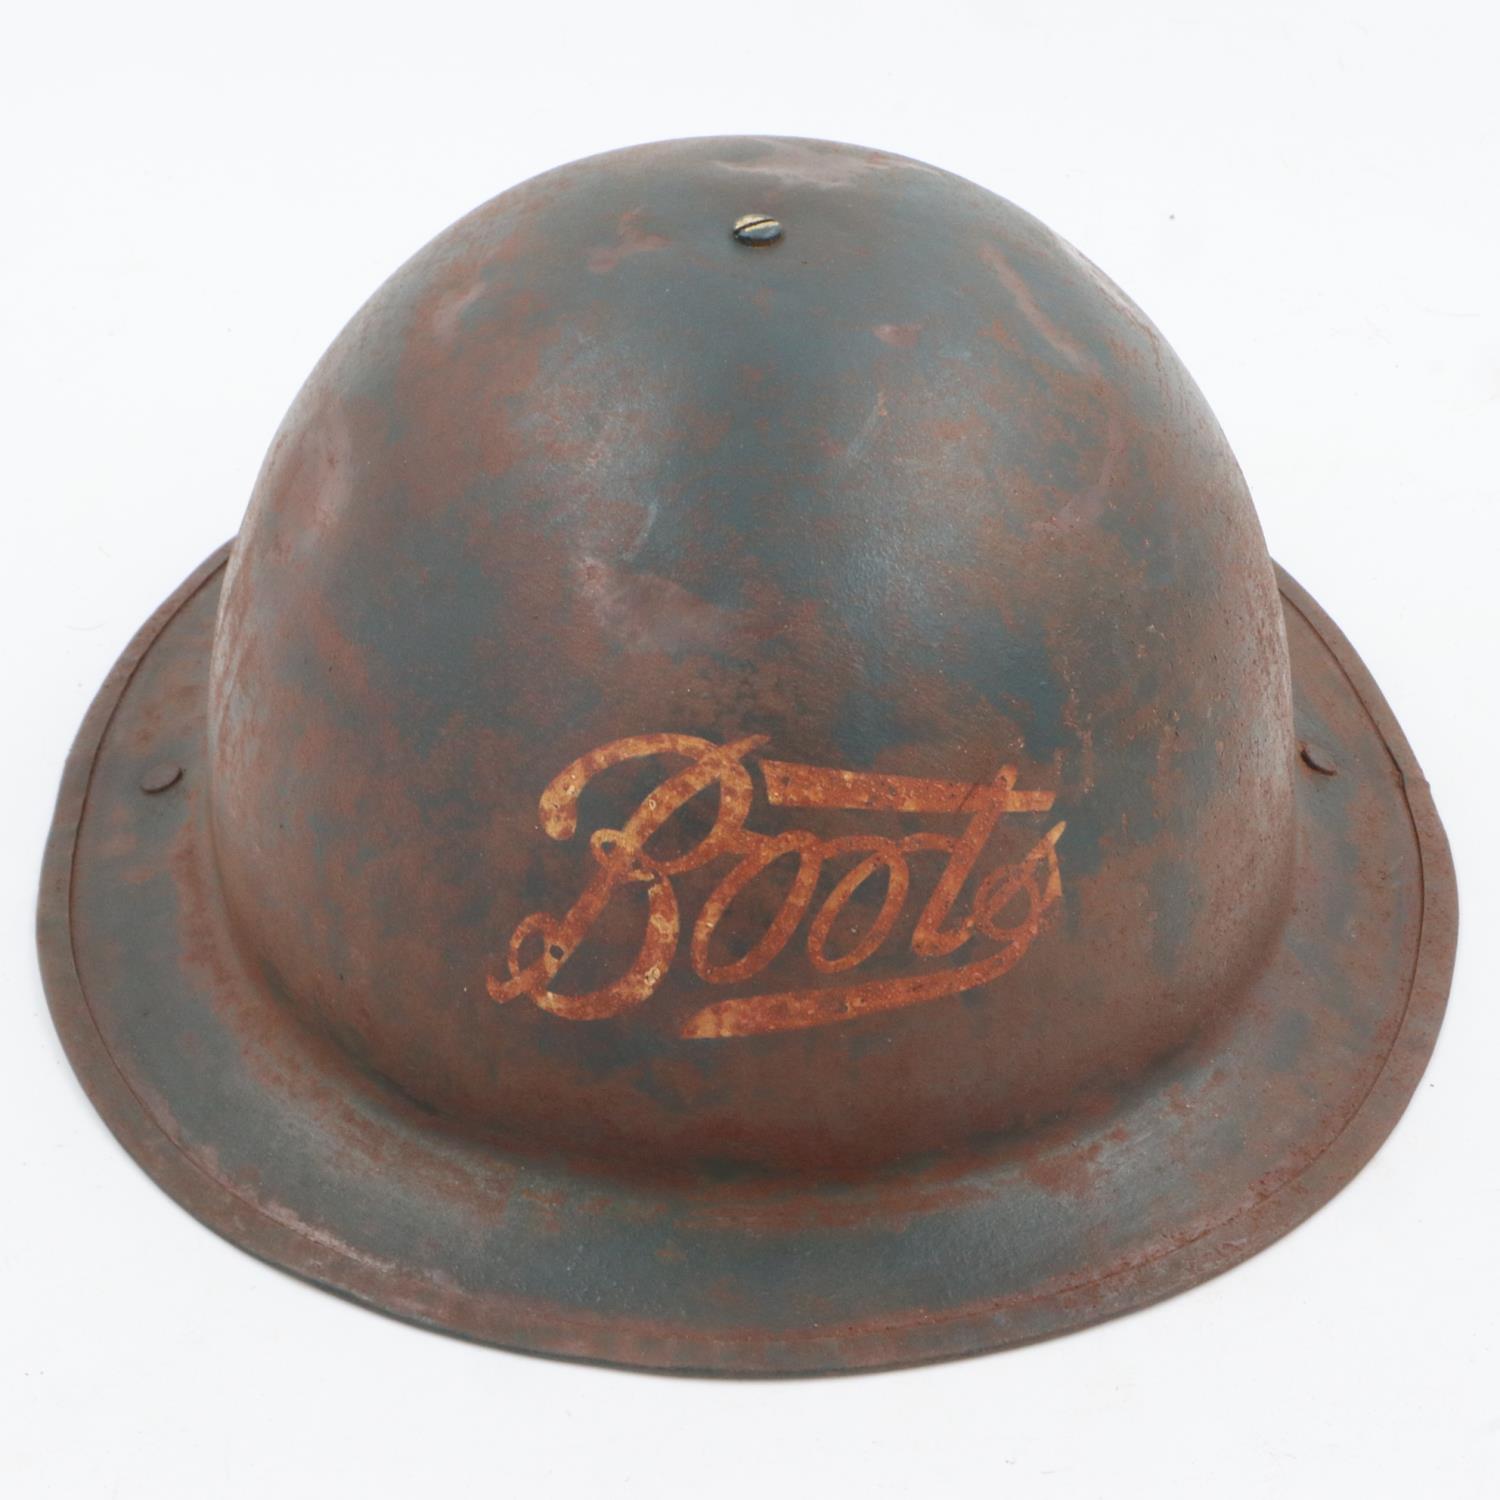 WWII British home front private purchase “Tin Bowler” Helmet for Boots the Chemist Staff. UK P&P